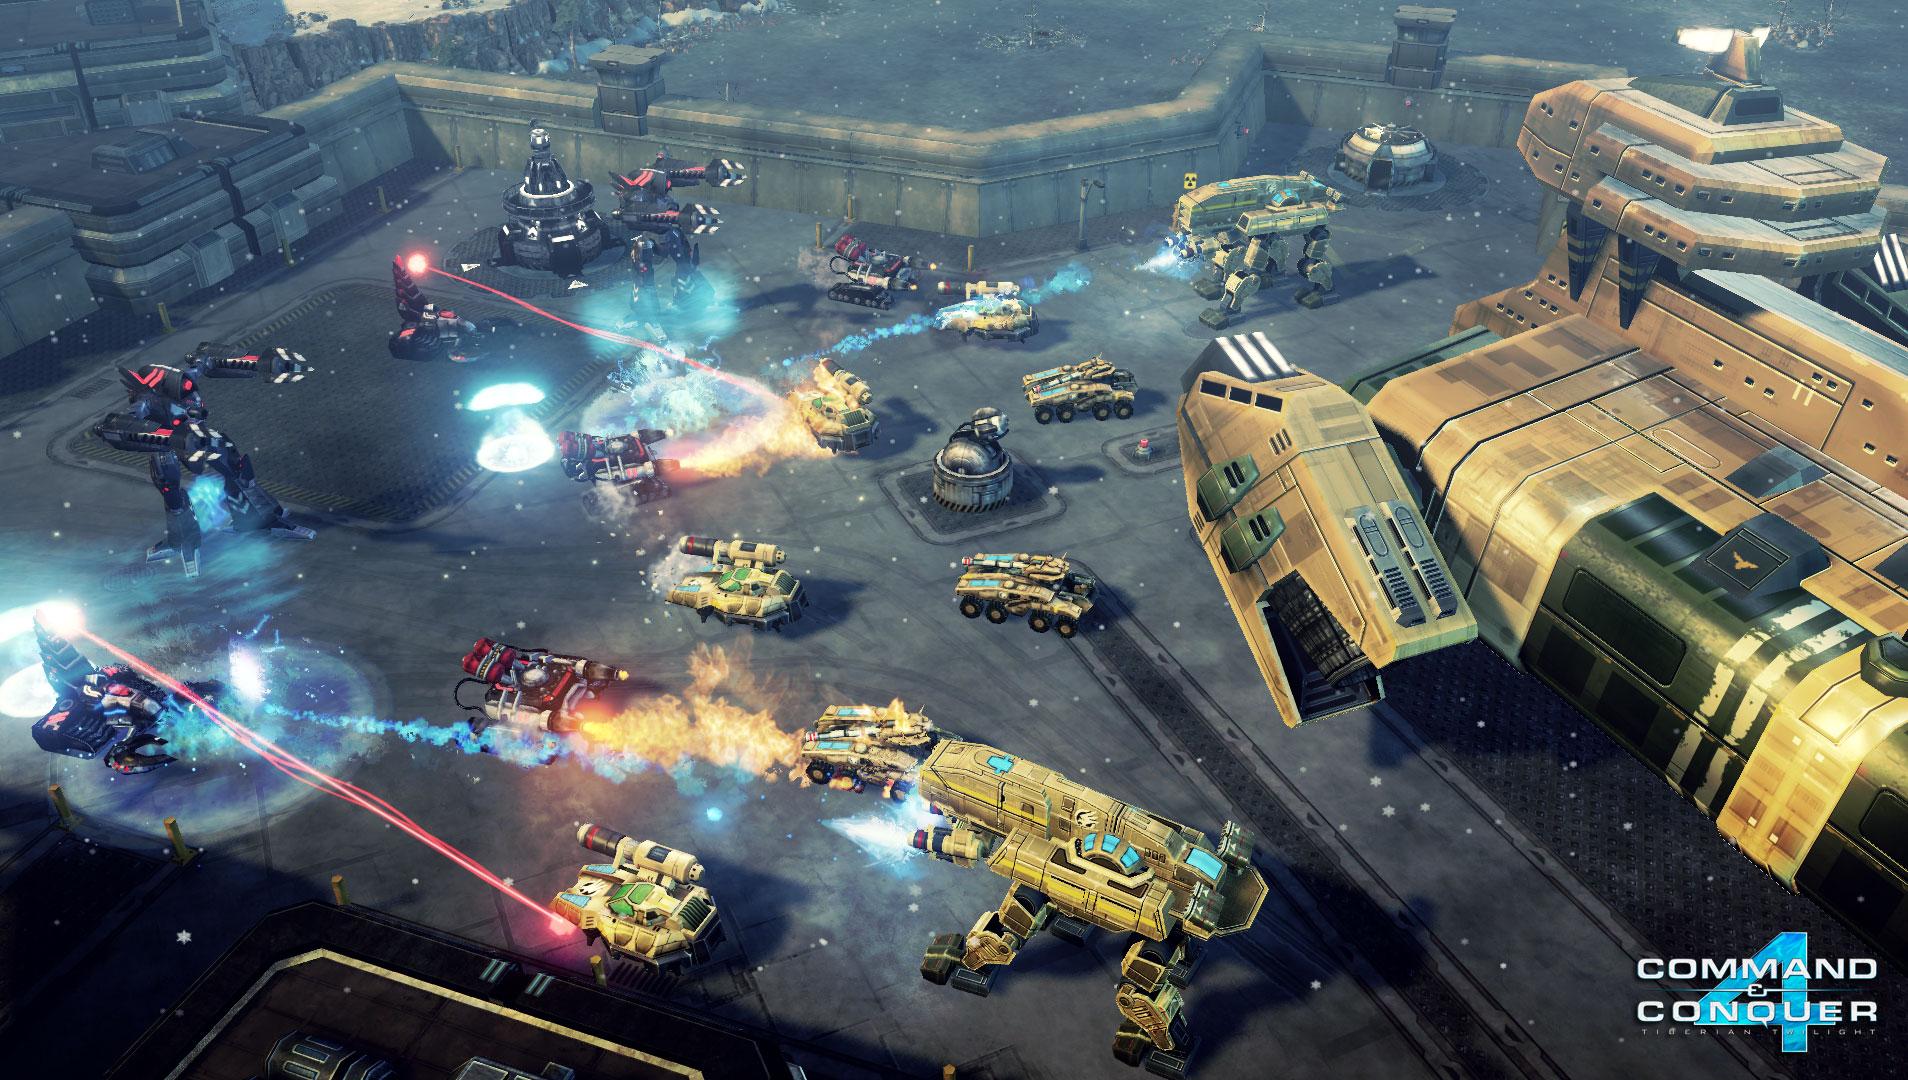 Find the best laptops for Command & Conquer 4 Tiberian Twilight